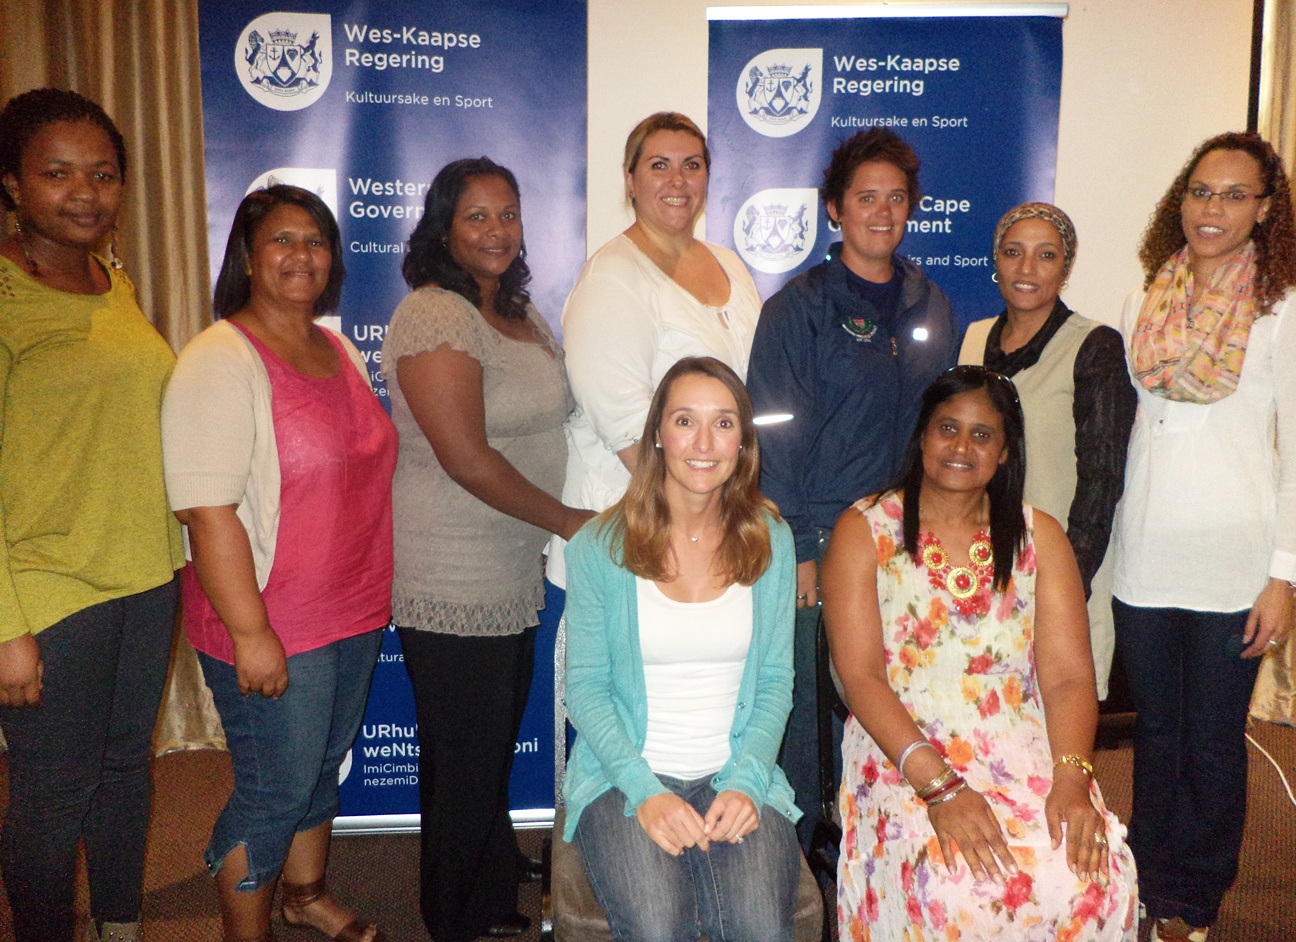 The workshop supported the sustainable growth in women and girls sport in the province